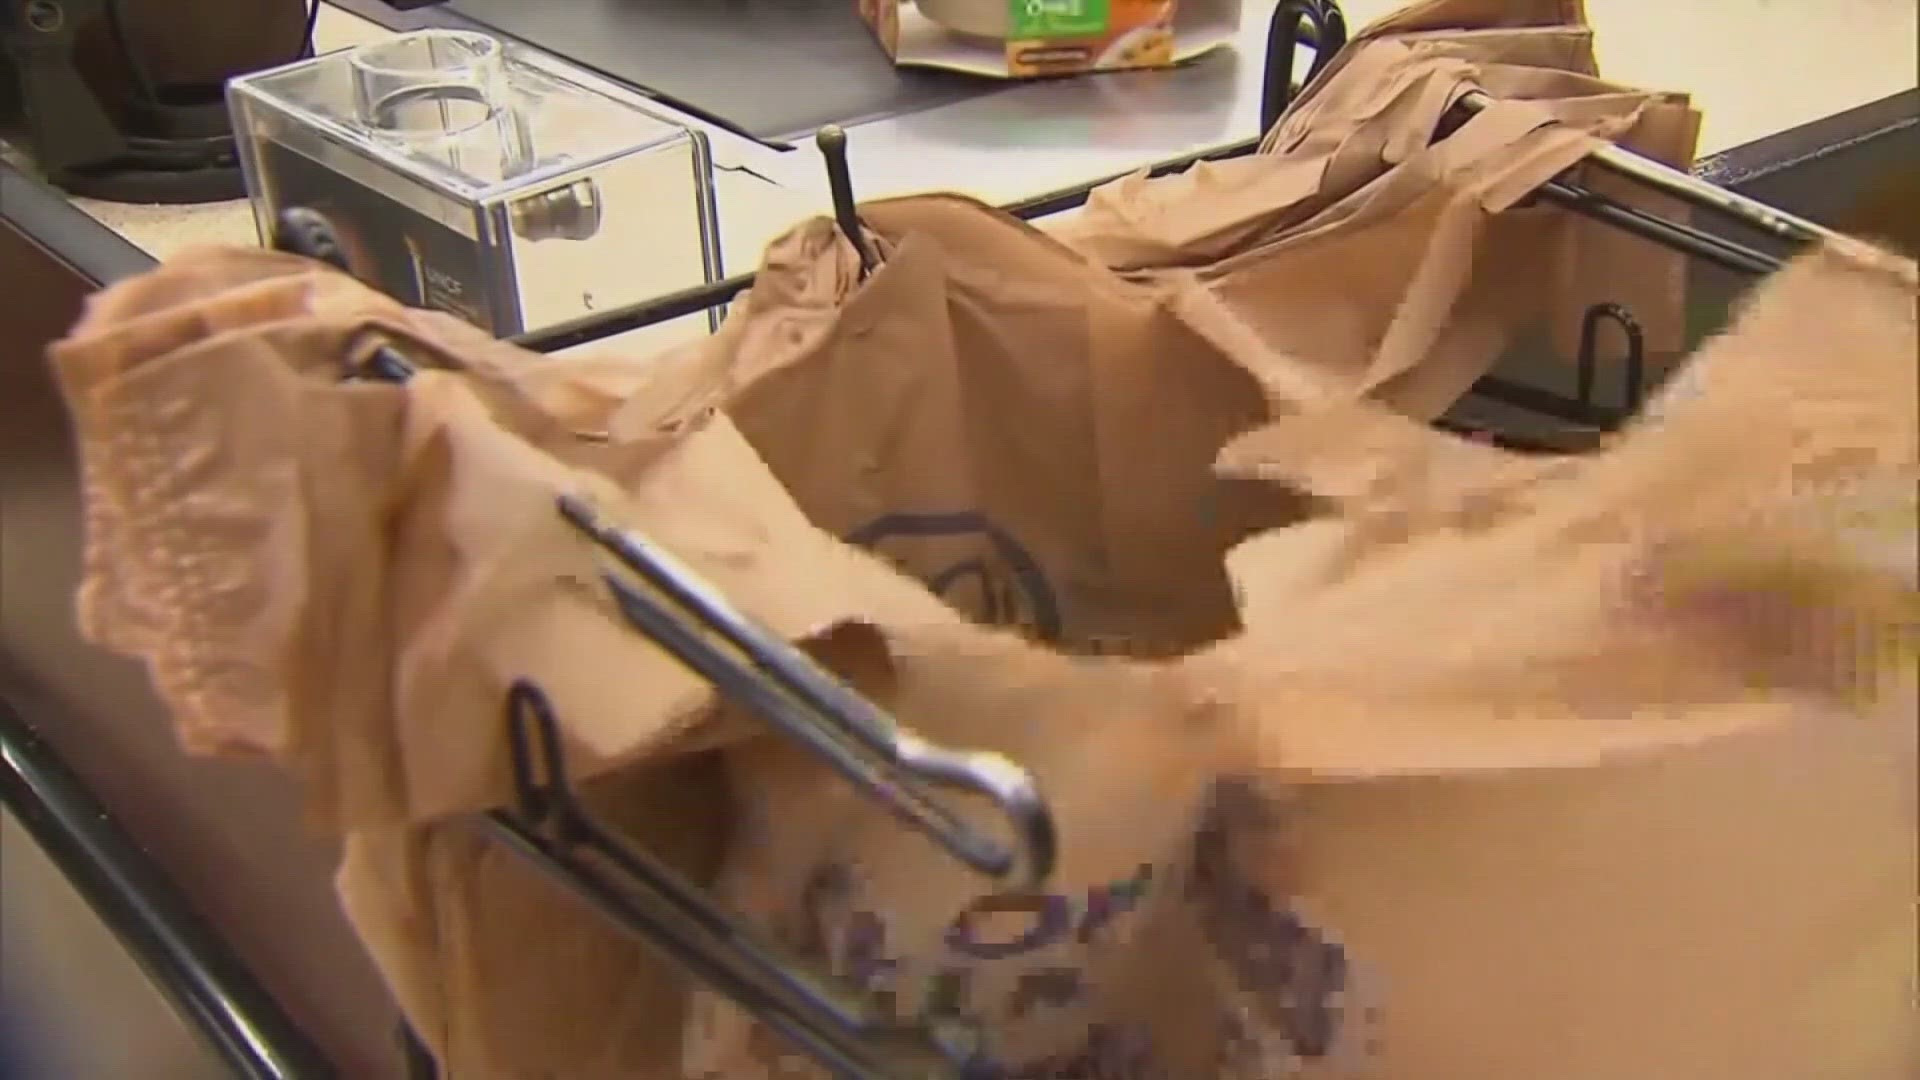 Starting Jan. 1, most retailers will no longer be able to provide single-use plastic bags - instead, customers can bring their own bags or purchase paper bags.